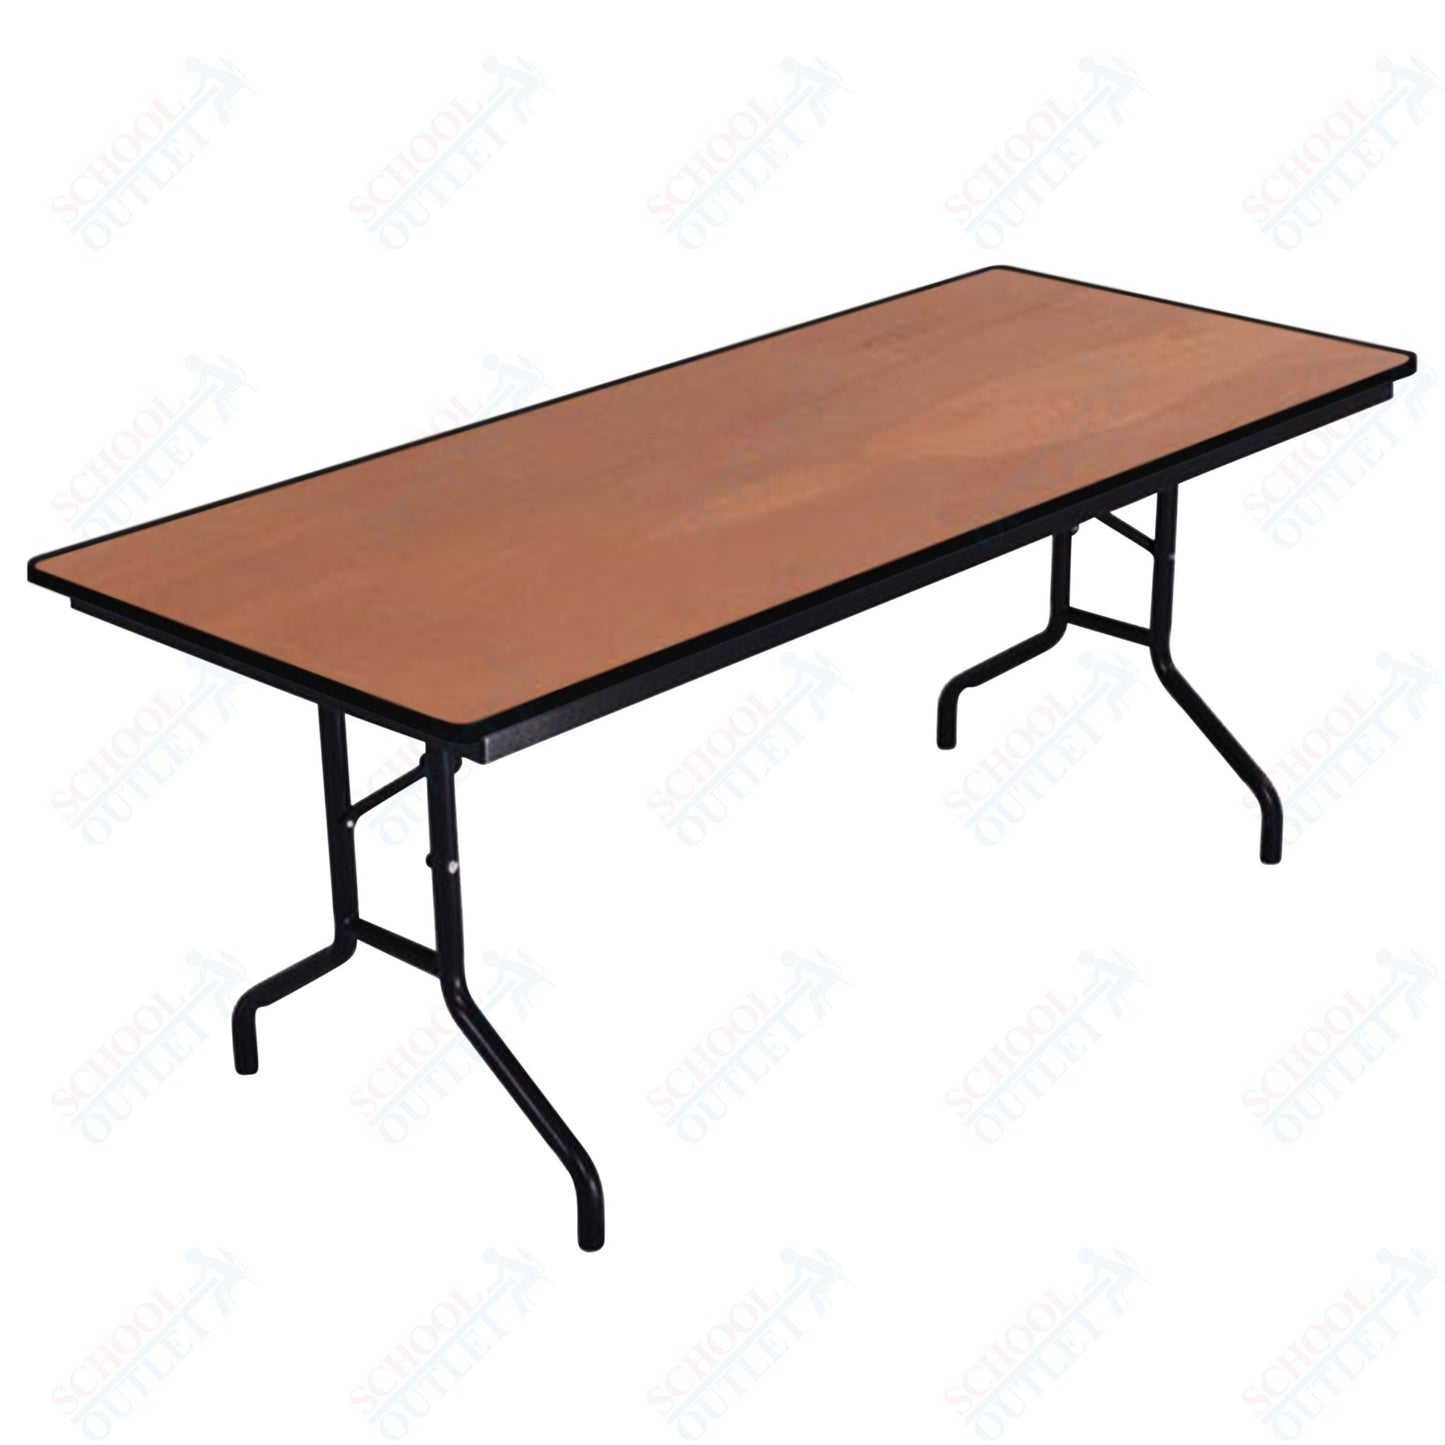 AmTab Folding Table - Plywood Stained and Sealed - Vinyl T - Molding Edge - 24"W x 96"L x 29"H (AmTab AMT - 248PM) - SchoolOutlet